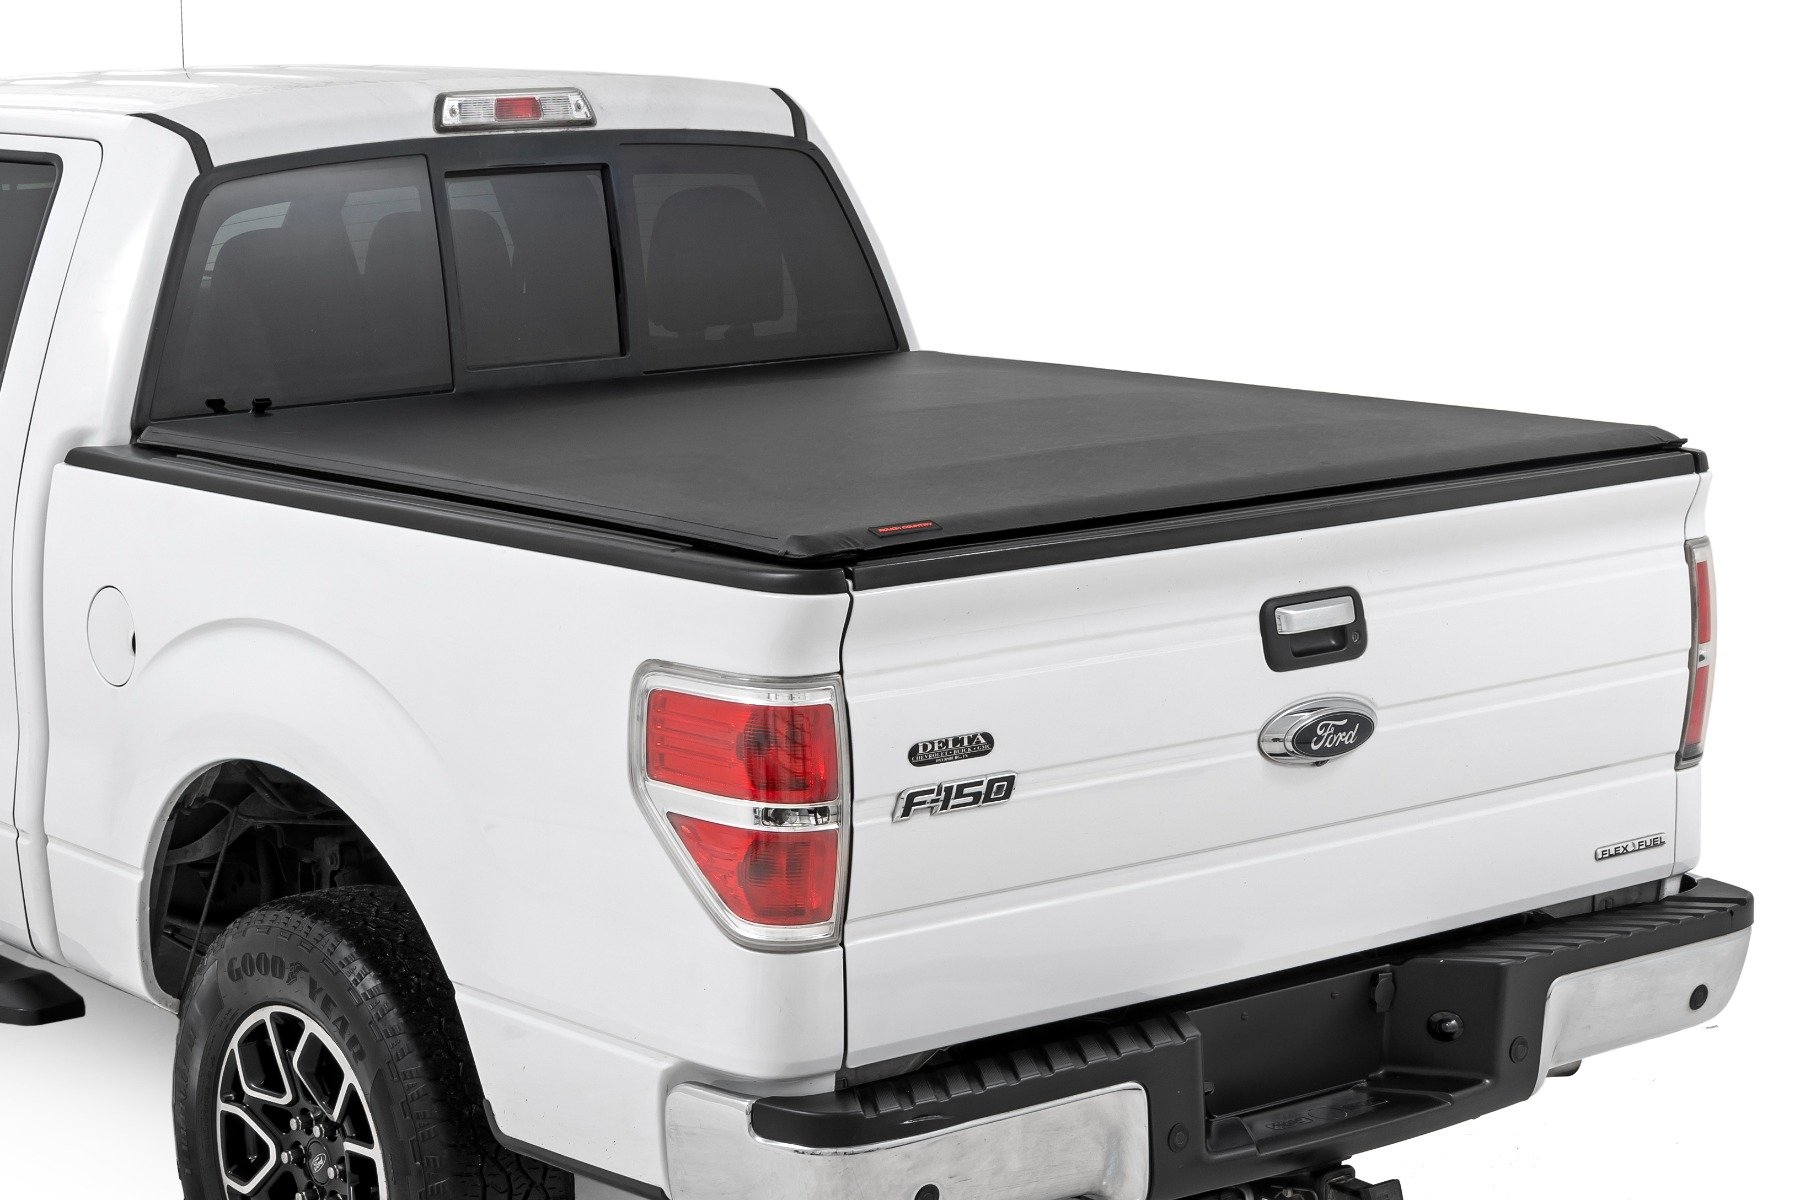 Ford F-150 Bed Cover - Soft Roll Up - 5'7 Bed